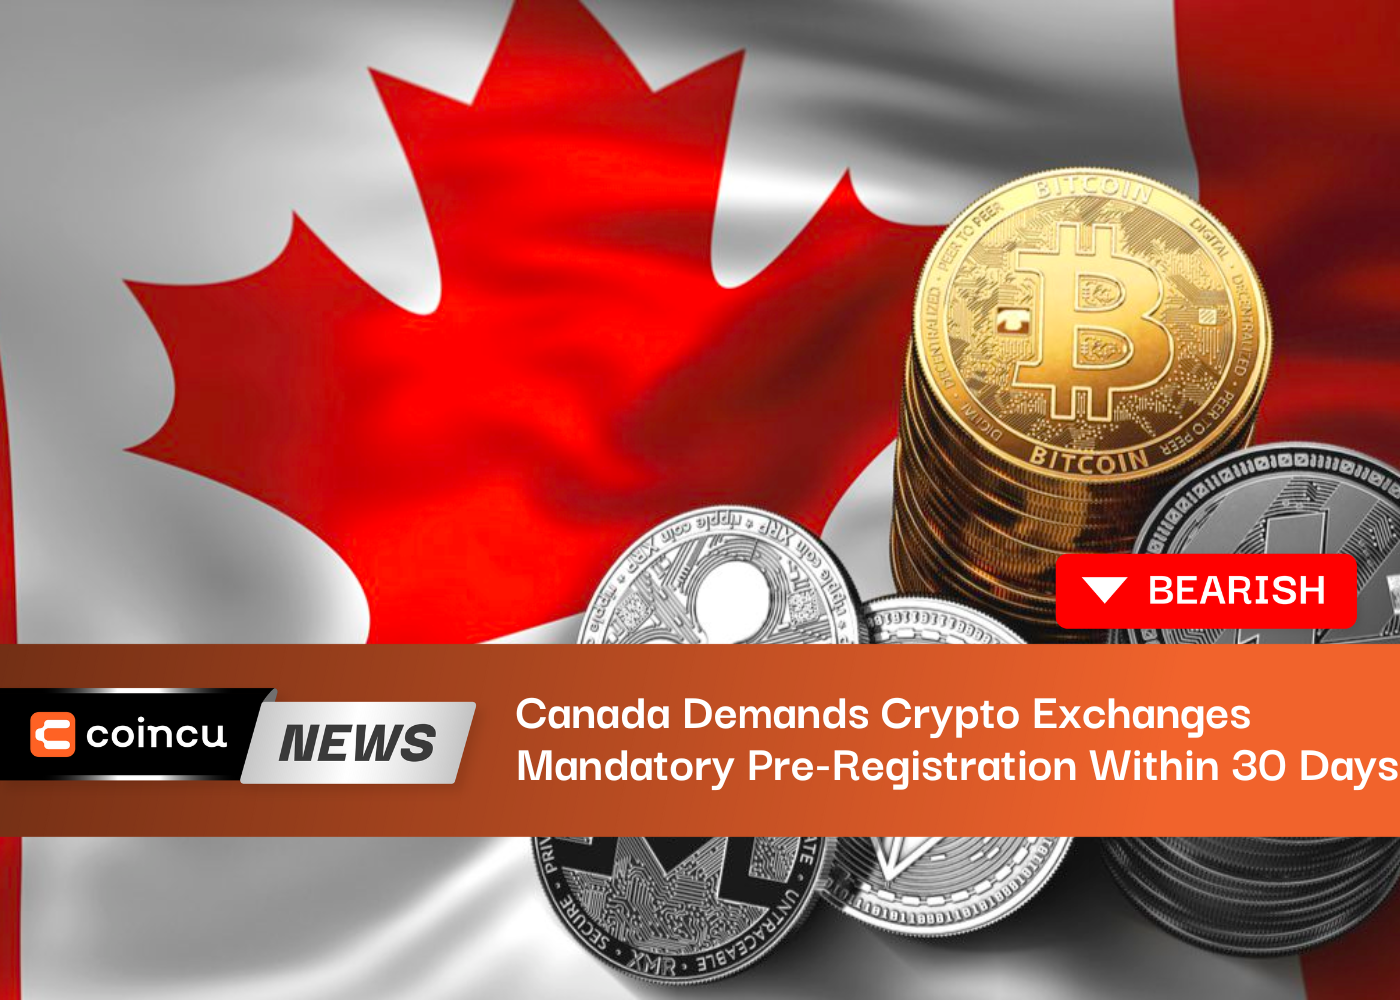 Canada Demands Crypto Exchanges Mandatory Pre-Registration Within 30 Days